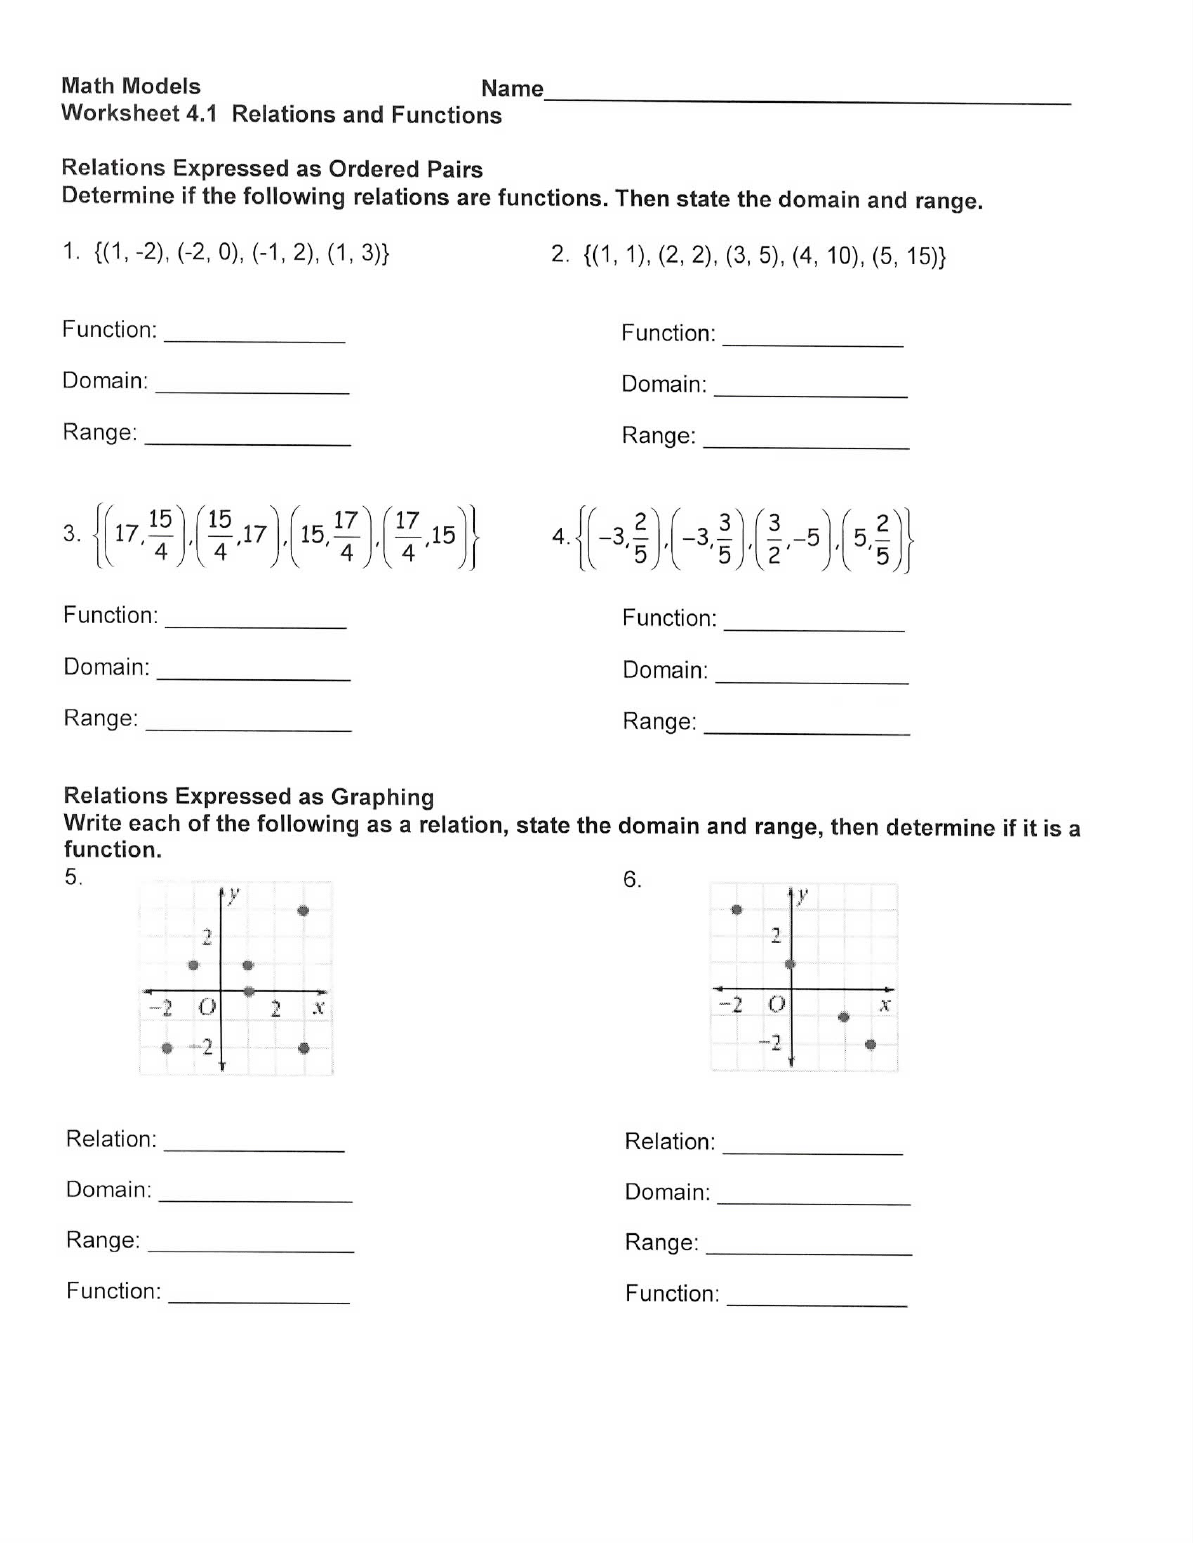 math-models-worksheet-4-1-relations-and-functions-answer-key-function-worksheets